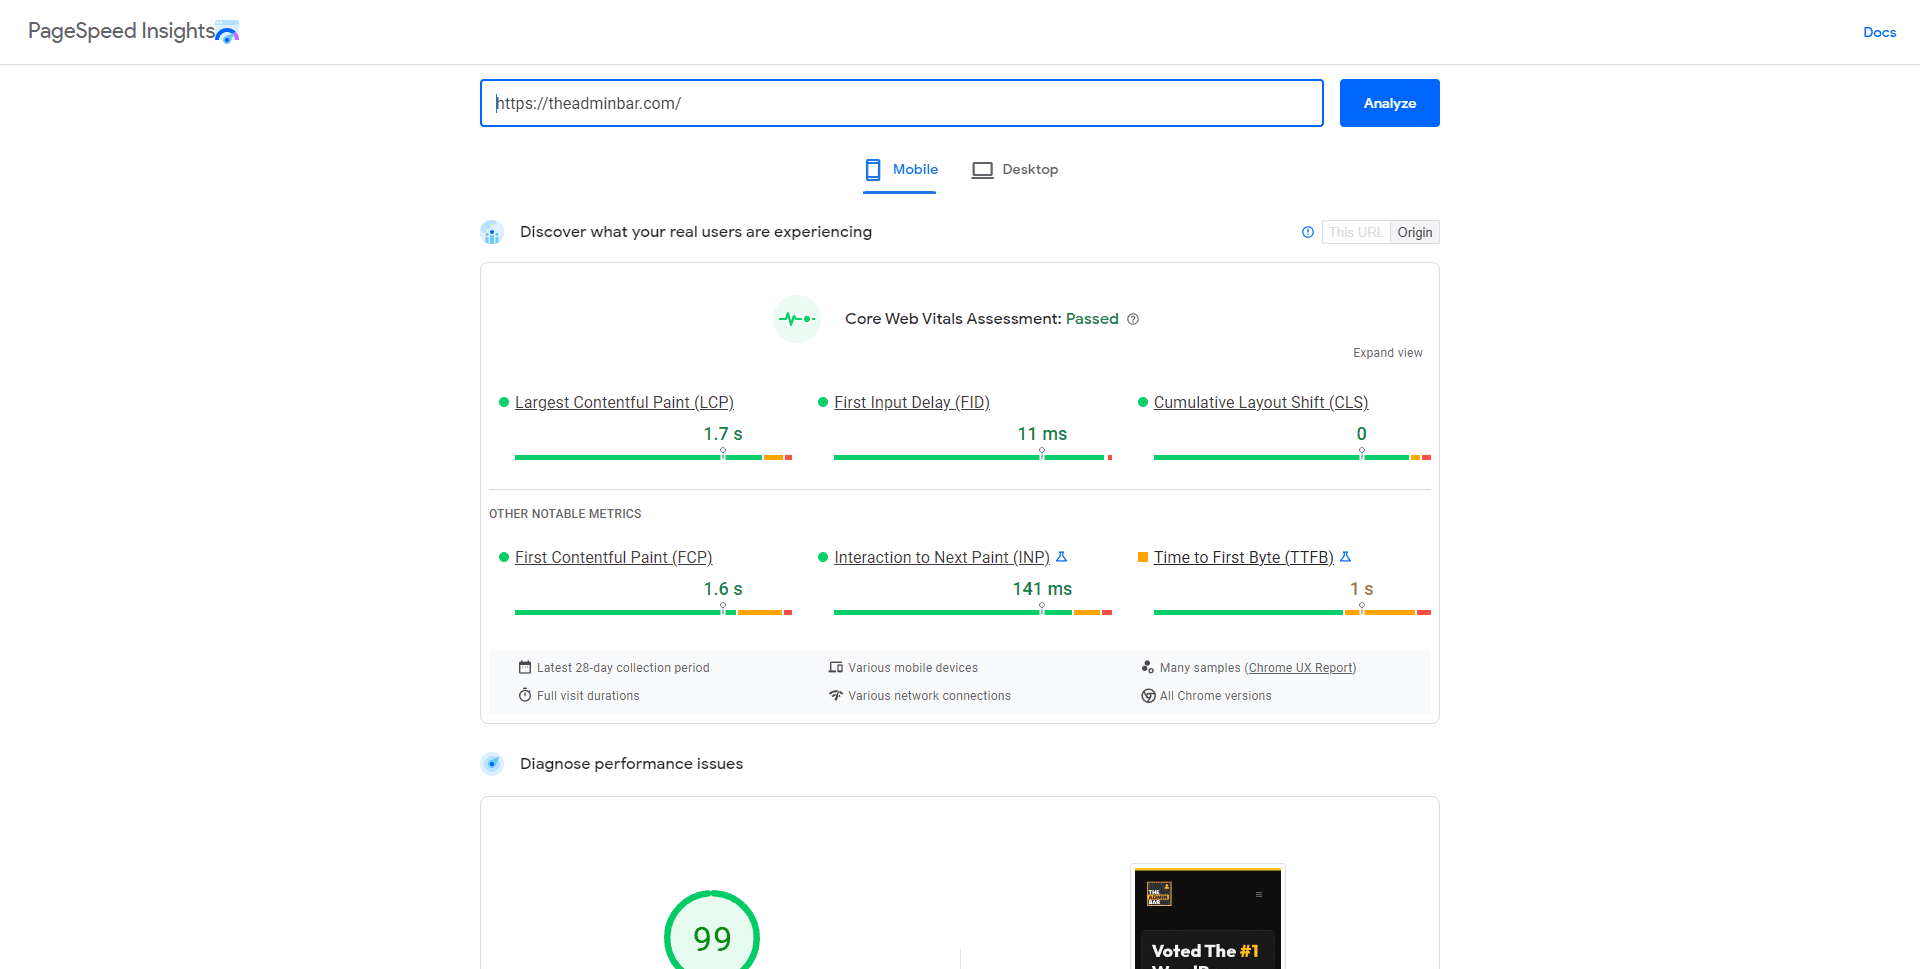 A screenshot of the results of the PageSpeed Insights test